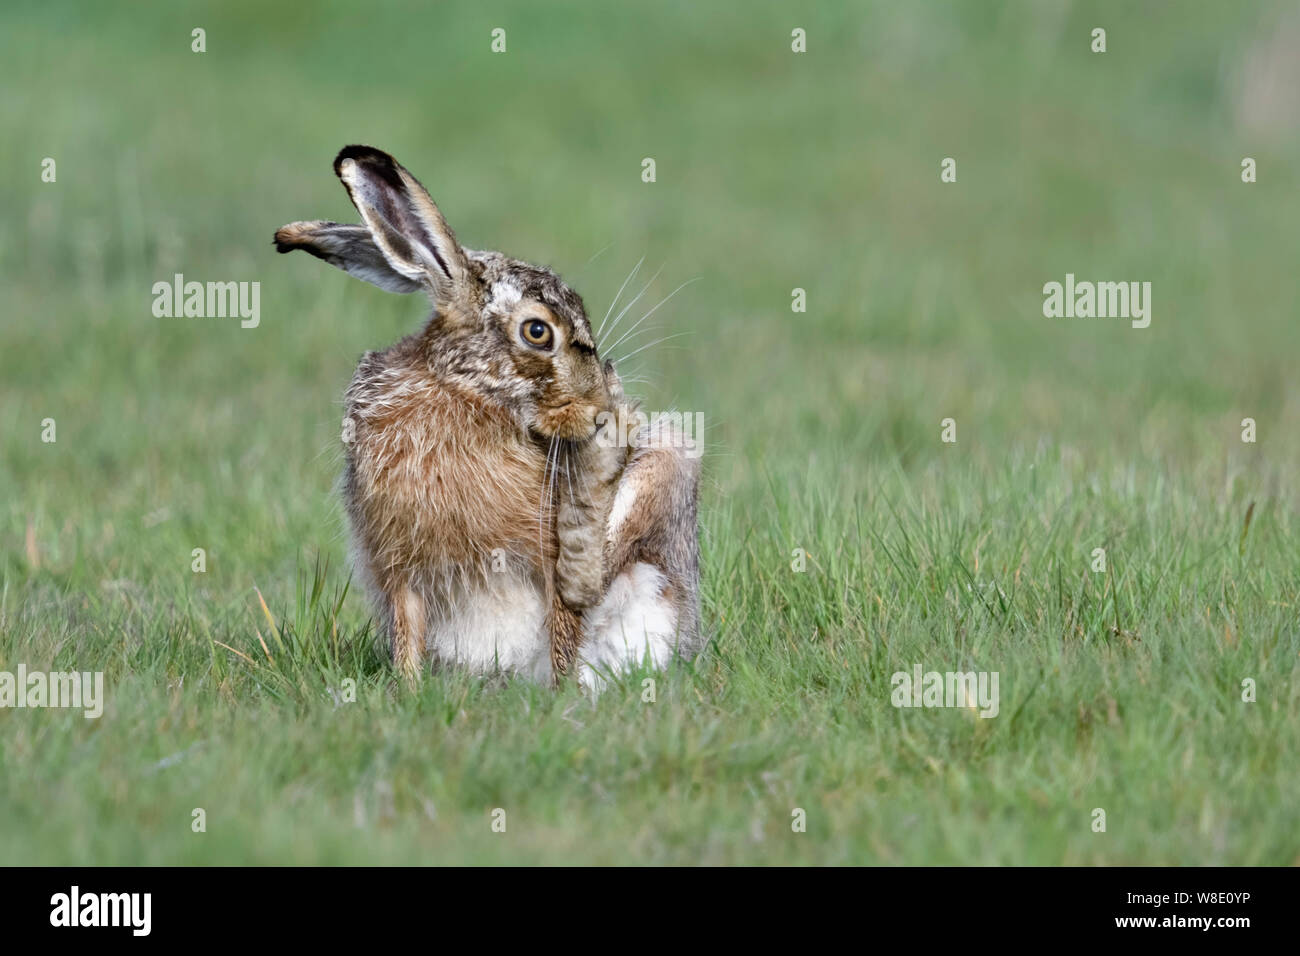 Brown Hare / European Hare / Feldhase ( Lepus europaeus ) grooming, cleaning its hind paw, taking care of paws, wildlife, Europe. Stock Photo